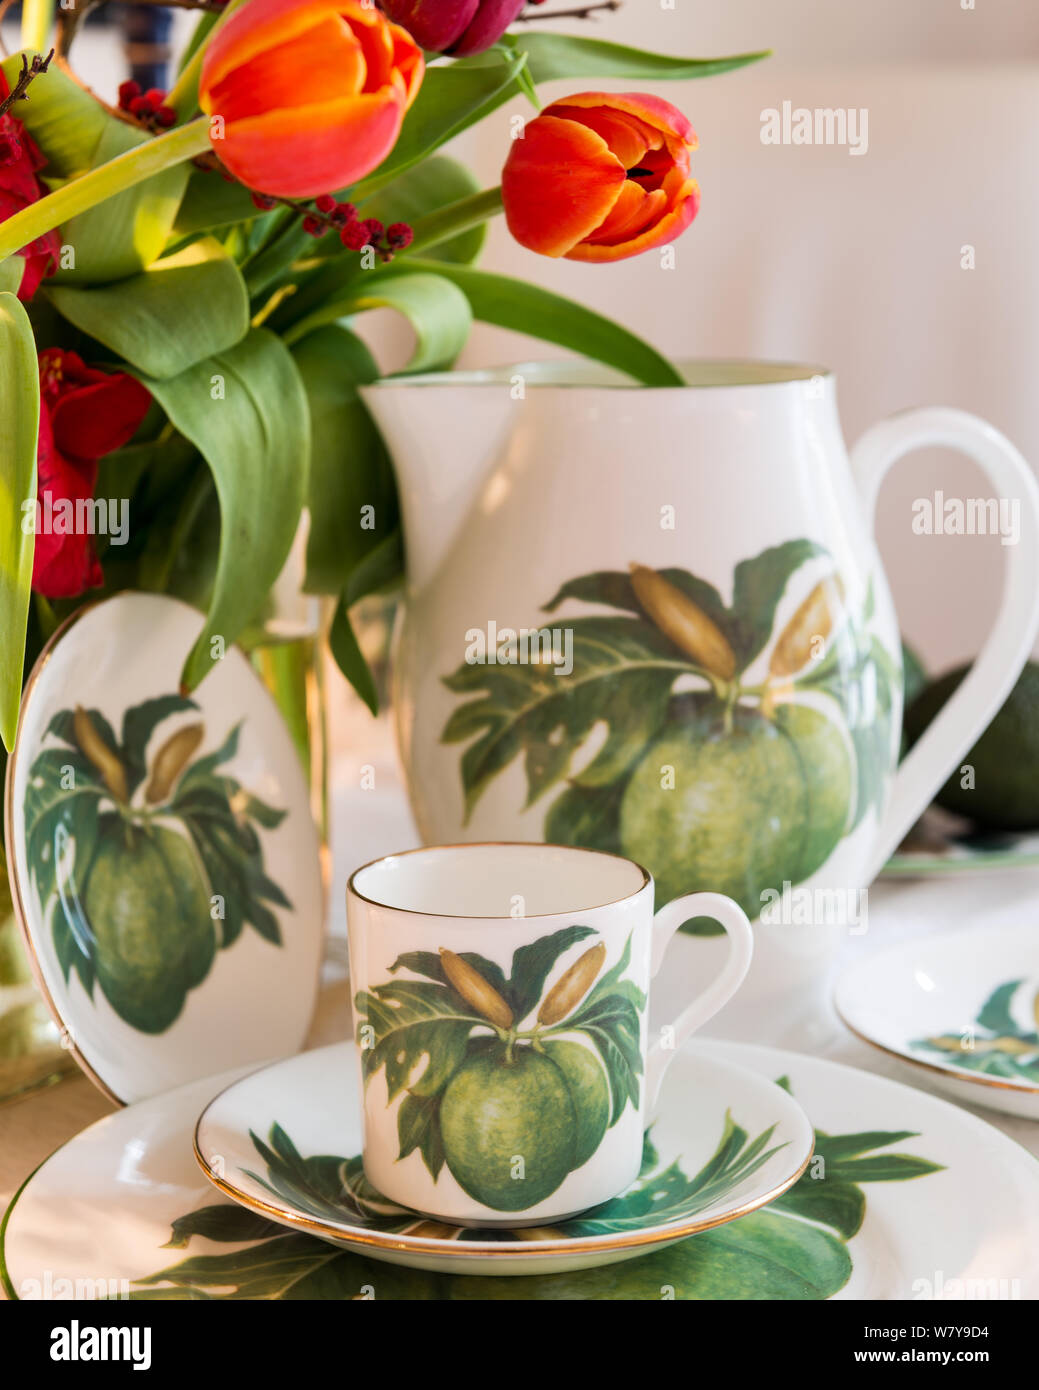 Jenny Mein's breadfruit collection by flowers Stock Photo